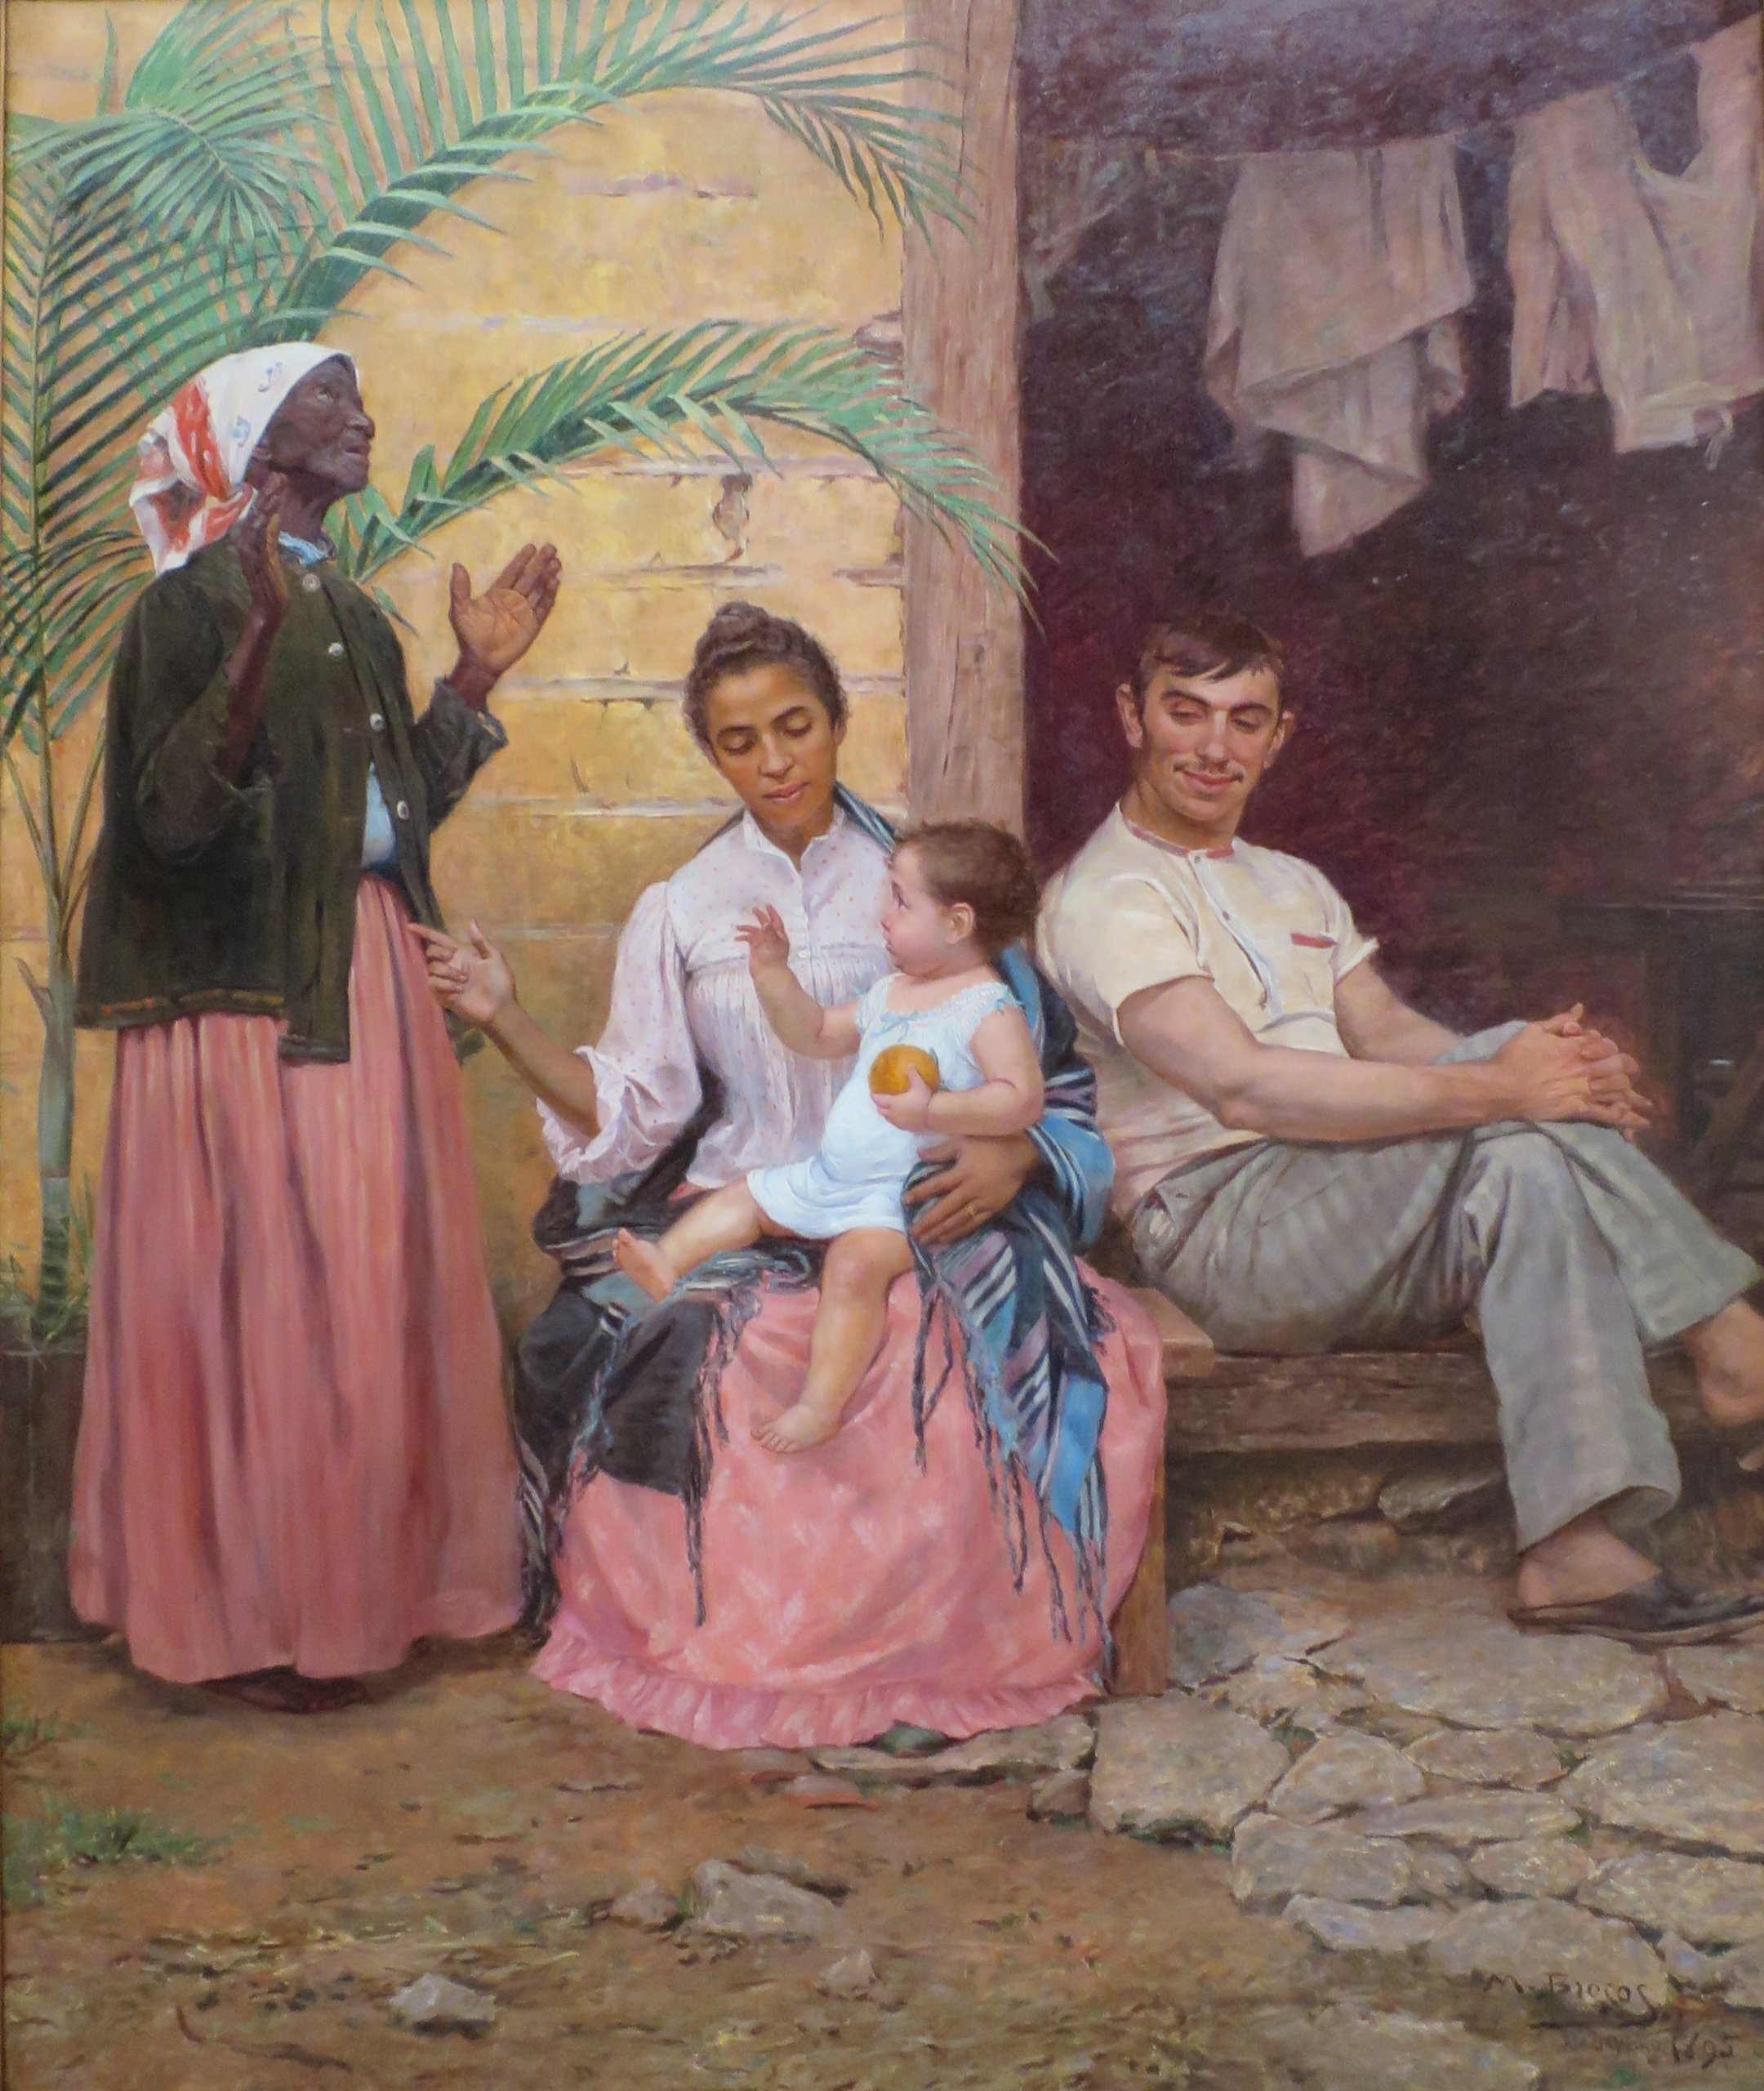 A Redenção de Cam. Modesto Brocos y Gómez, Public domain, via Wikimedia Commons. An oil painting with the image of a black grandmother standing next to a lighter-skinned, sitting mother who is holding her child on her lap. The grandmother is looking up at the sky with her hands raised.  Next to the mother, you see a seated white man, presumably the father, sitting with his legs crossed.